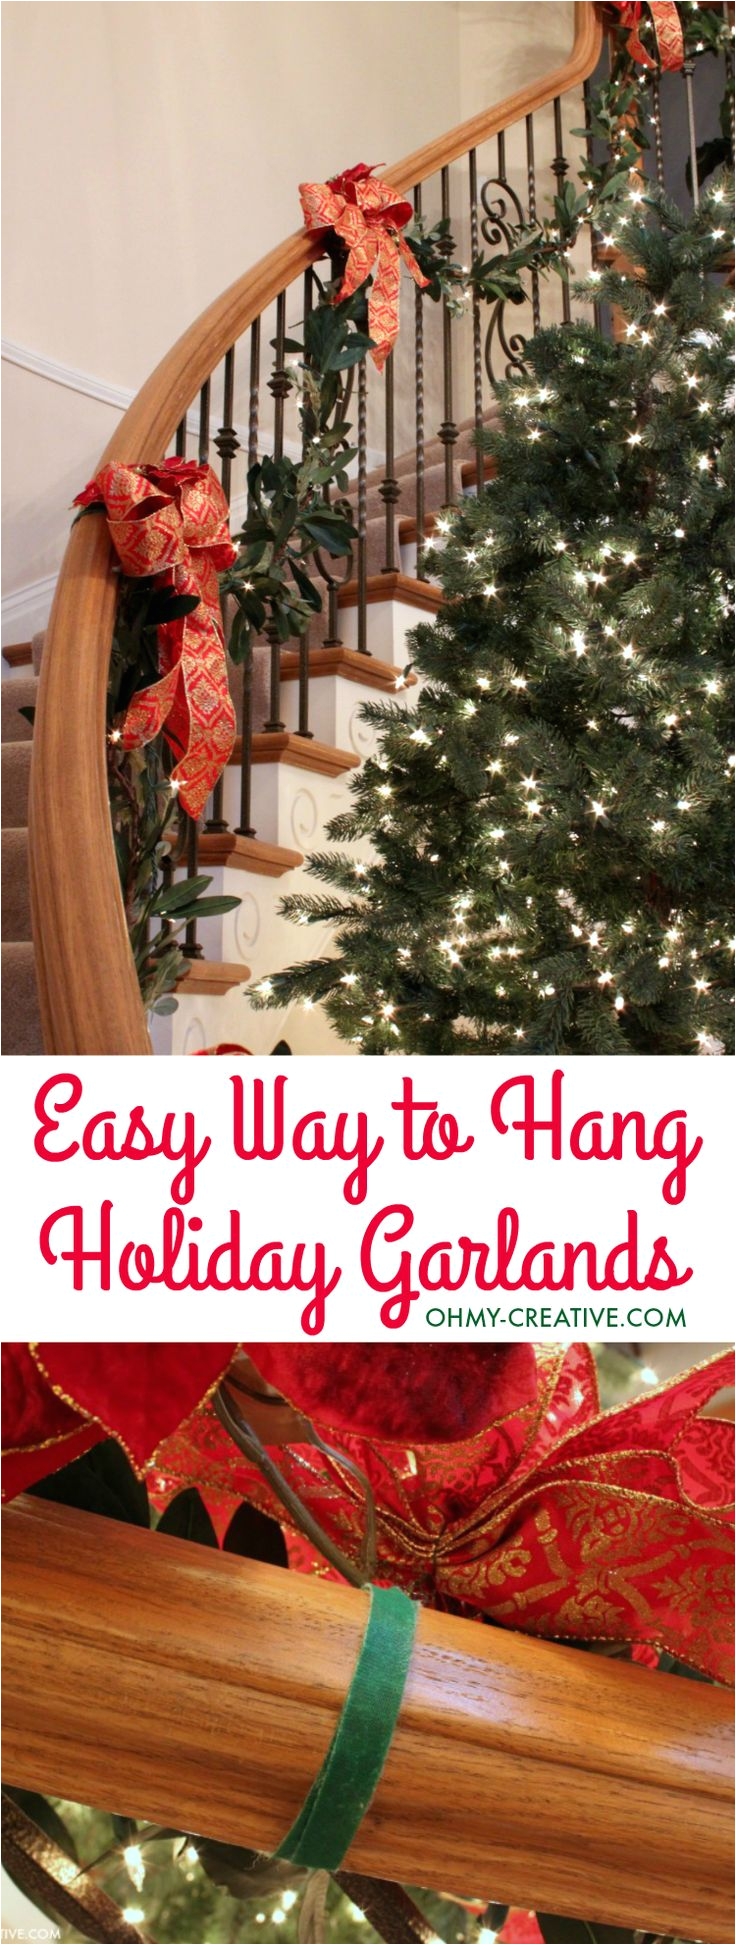 cascading garland is a gorgeous way to decorate the staircase but can seem to be